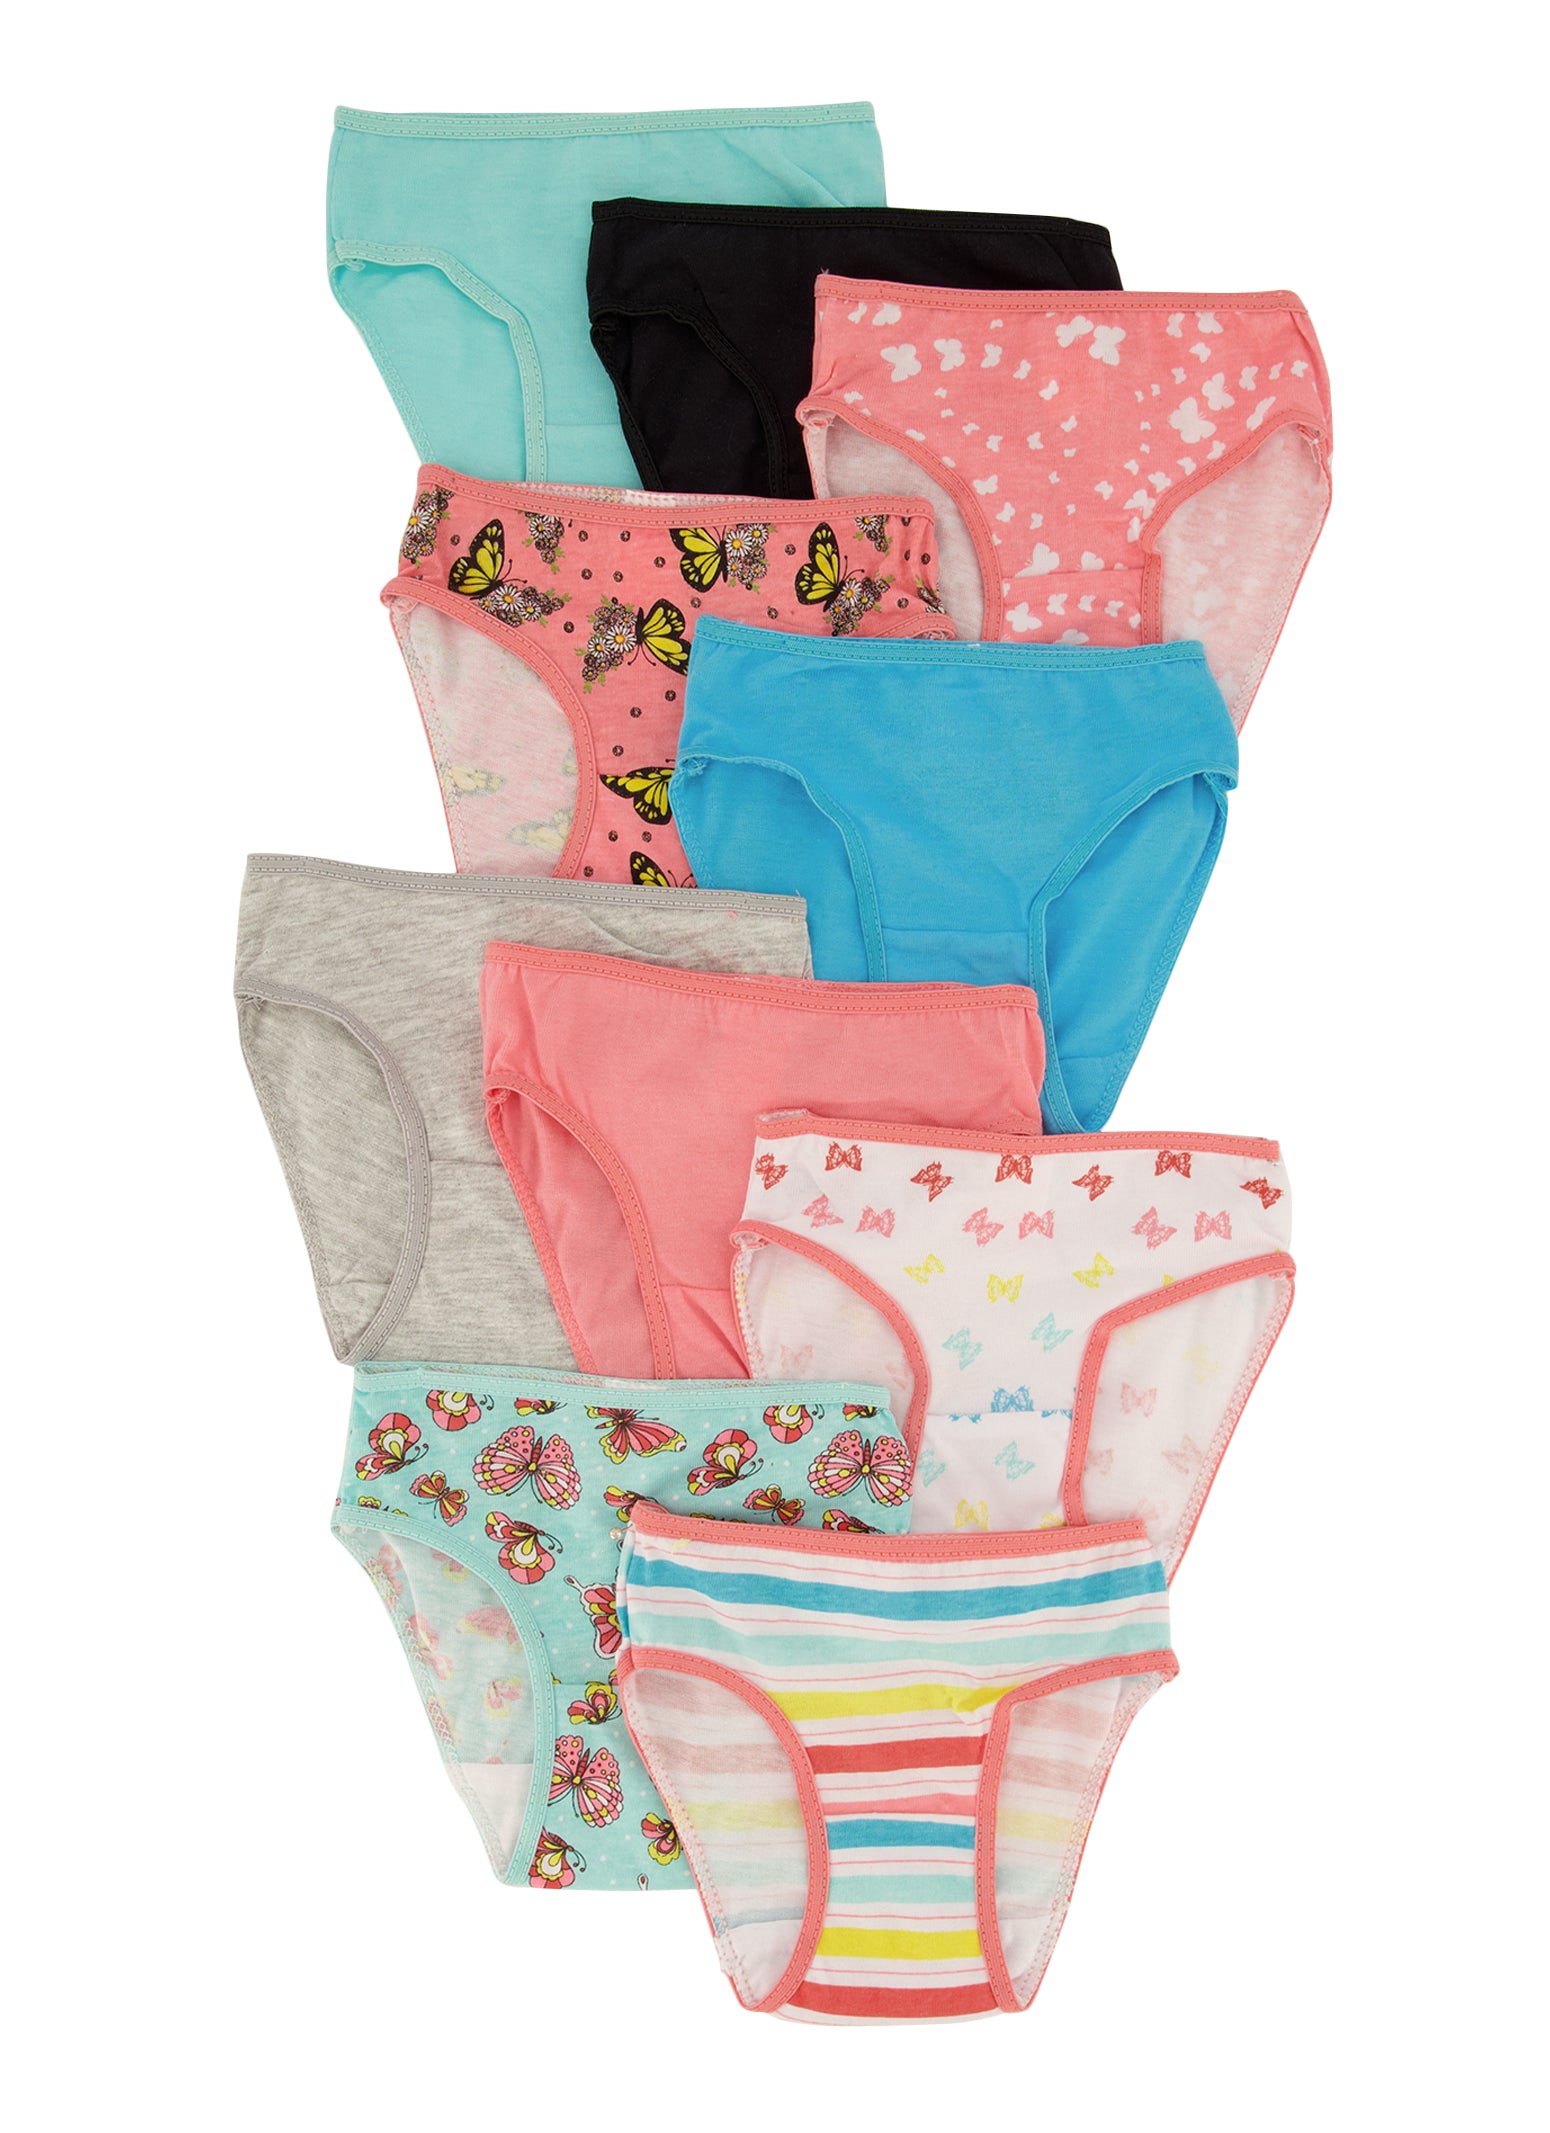 Pampers Easy Ups Girls' My Little Pony Disposable Training Underwear -  2t-3t - 74ct : Target